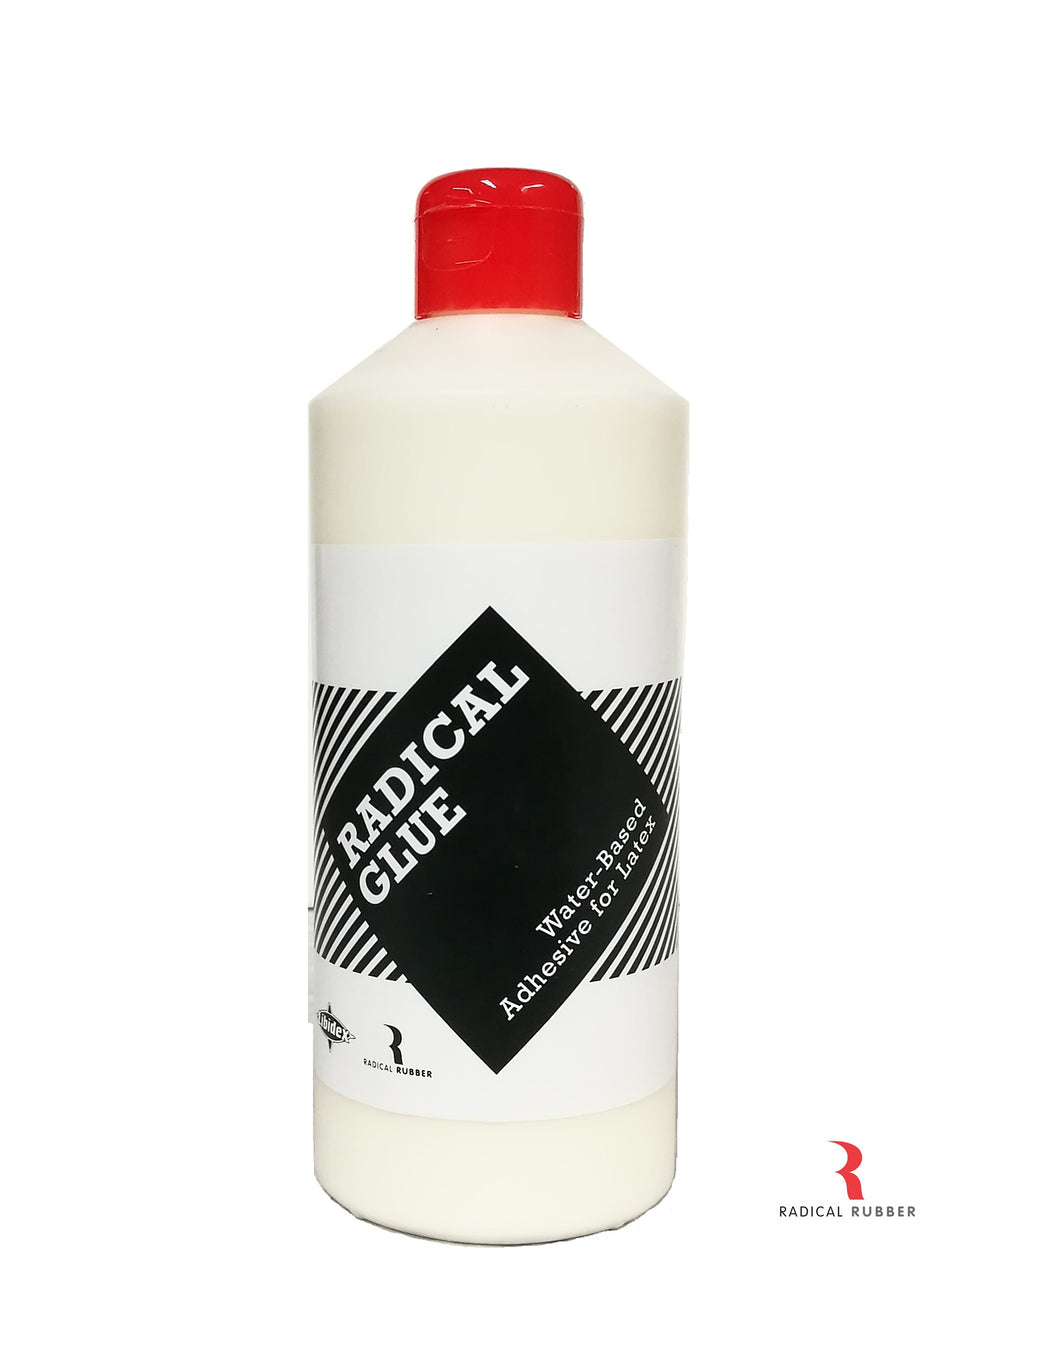 Radical Glue the water and latex based adhesive from Radical Rubber.